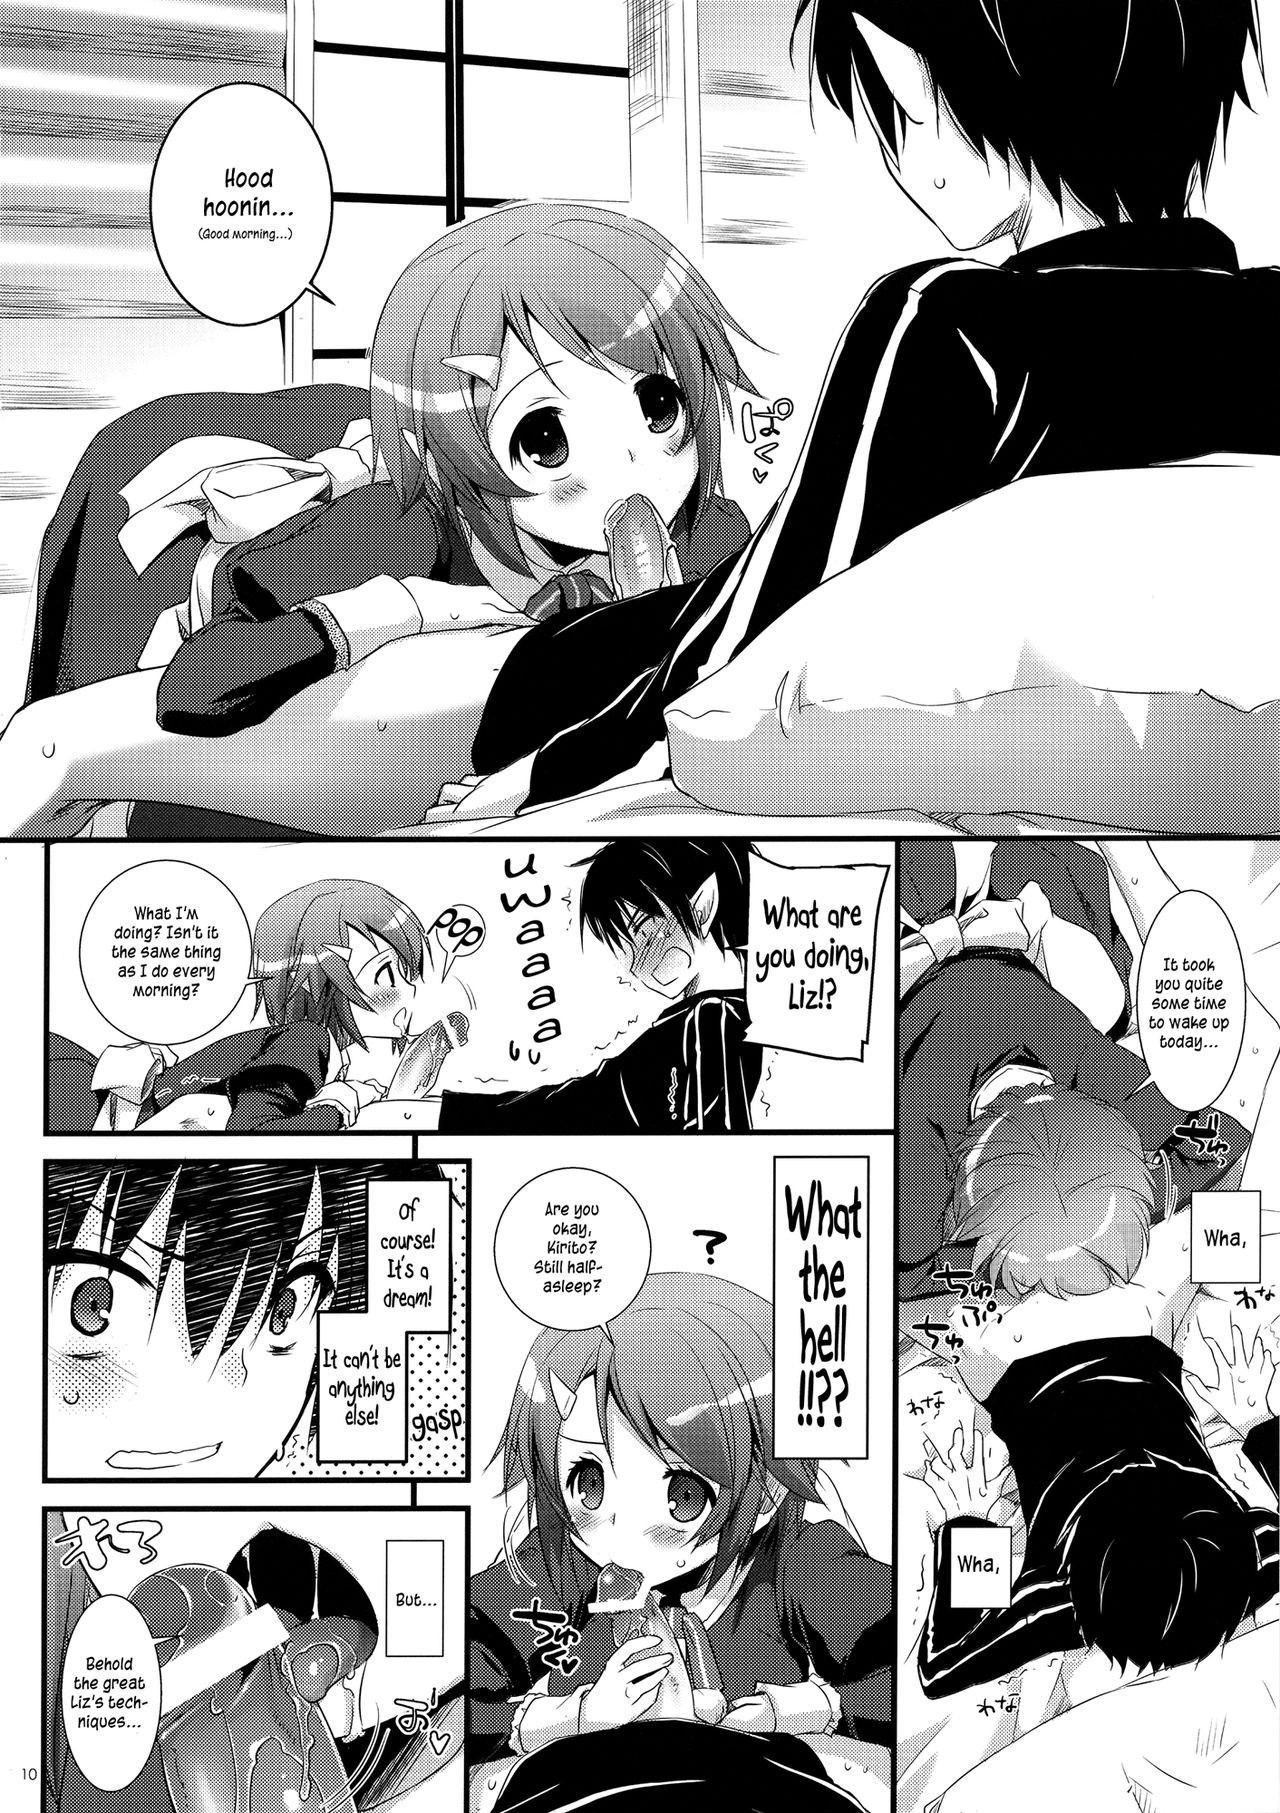 D.L. Action 72 hentai manga picture 9